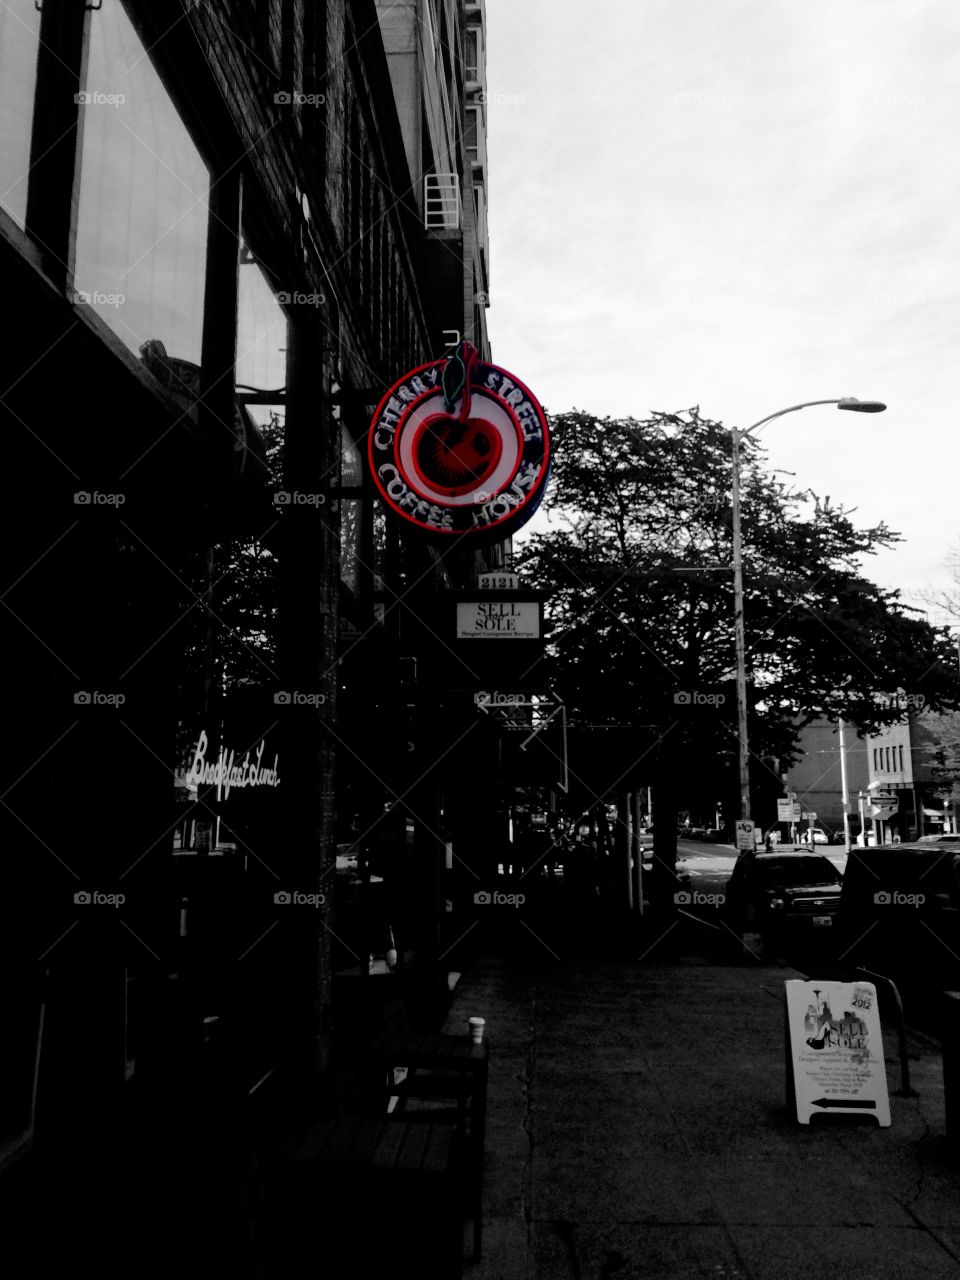 My love for cities is strong. Black and white photo with the "Cherry Street Coffee House" sign in color. In Seattle, Washington